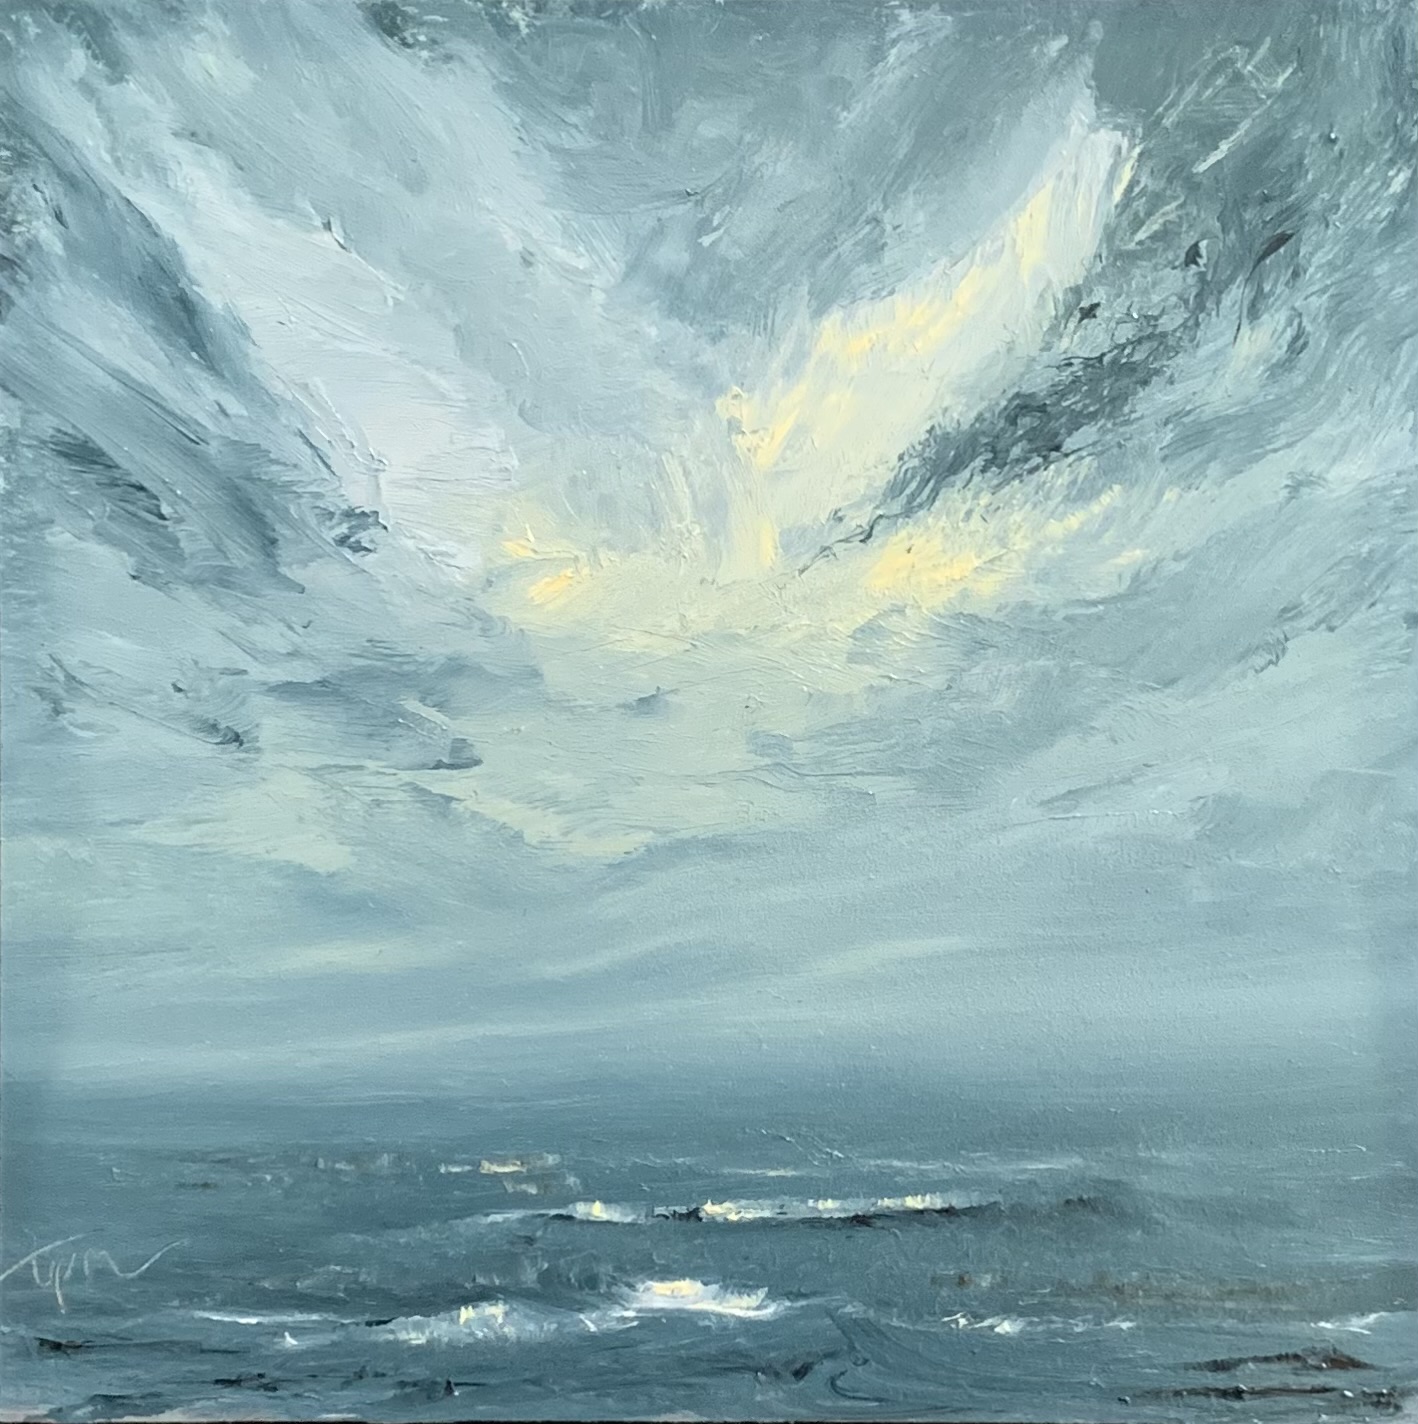 Original seascape oil painting by Tisha Mark, "Light At Last" 4"x4" oil on gessobord (2024). Light emerges in a stormy sky over a stormy sea.